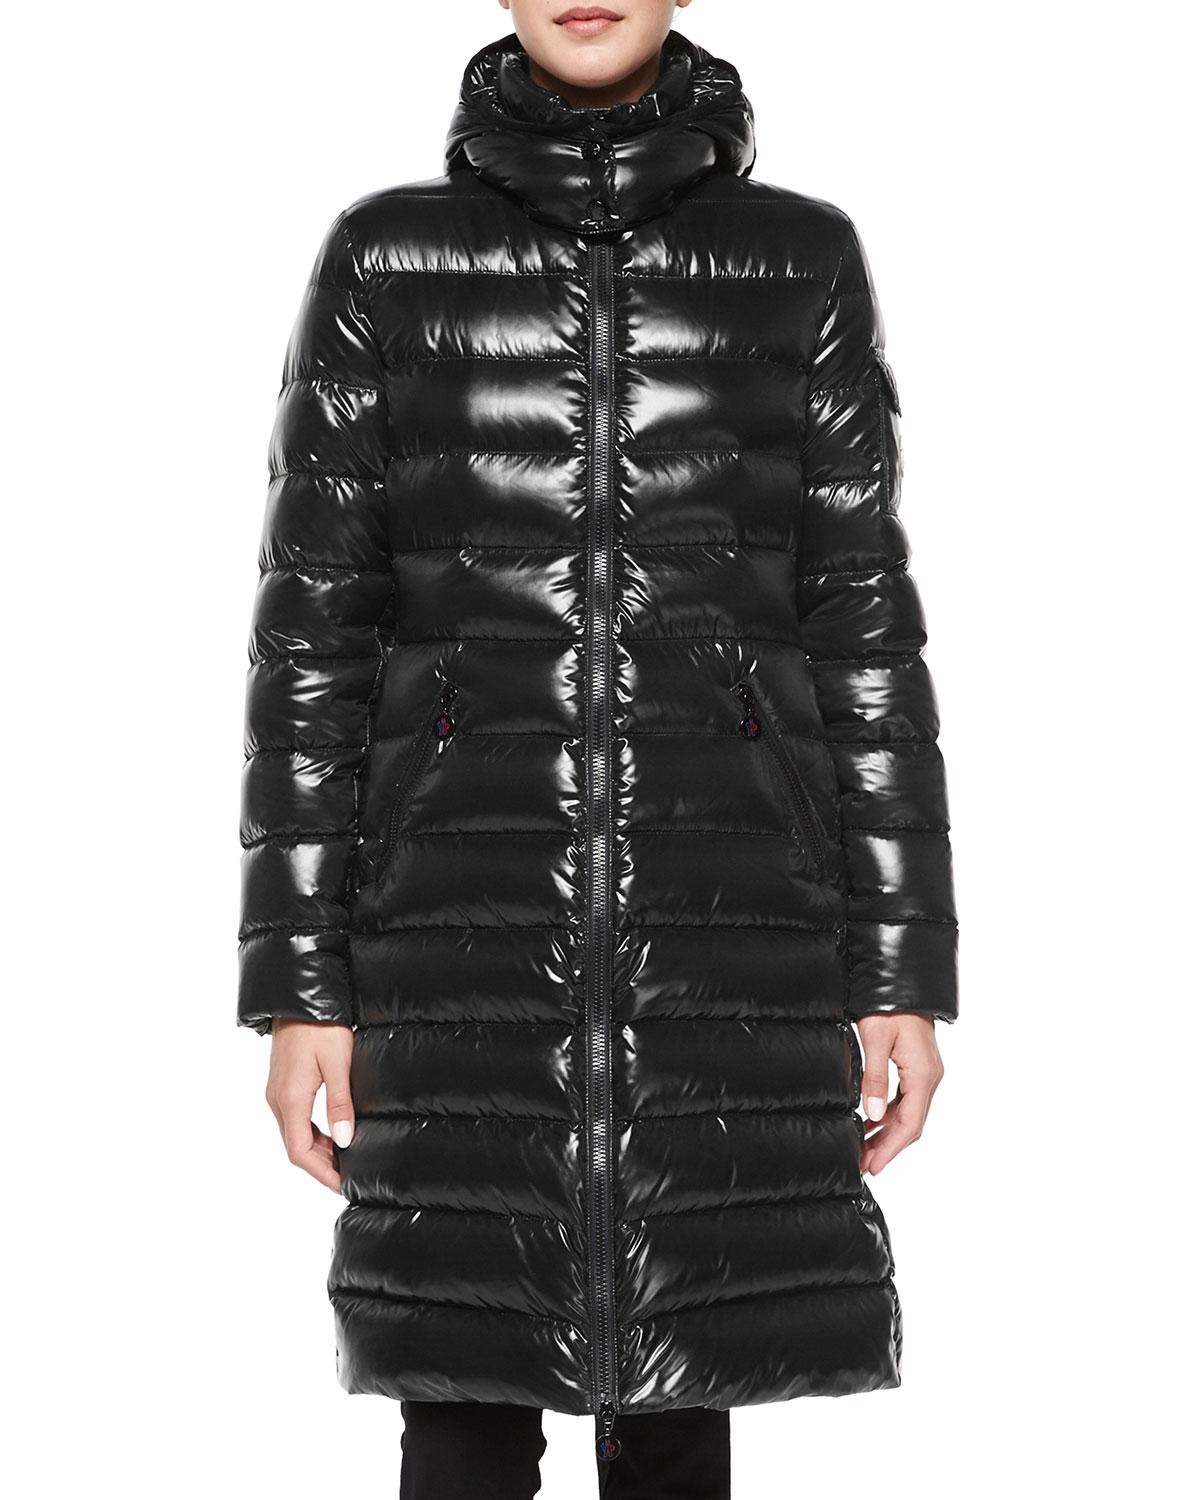 Lyst - Moncler Moka Shiny Fitted Puffer Coat With Hood in Black - Save ...